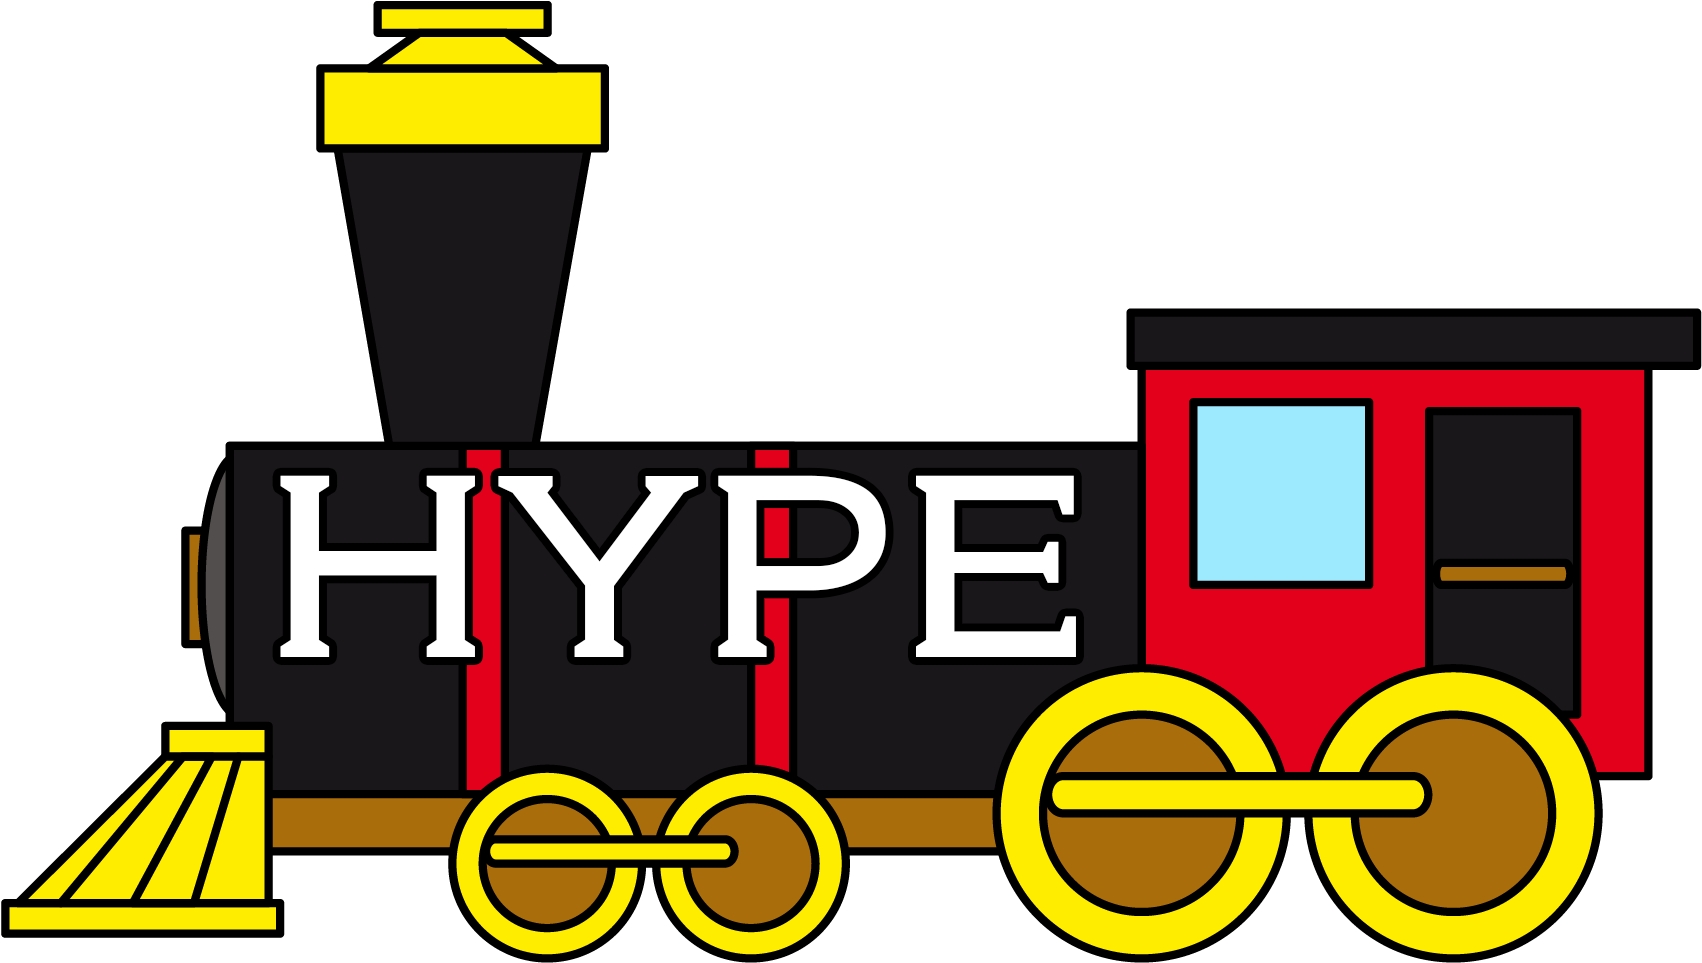 The Hype Train - Clipart Of Train (1879x1126)